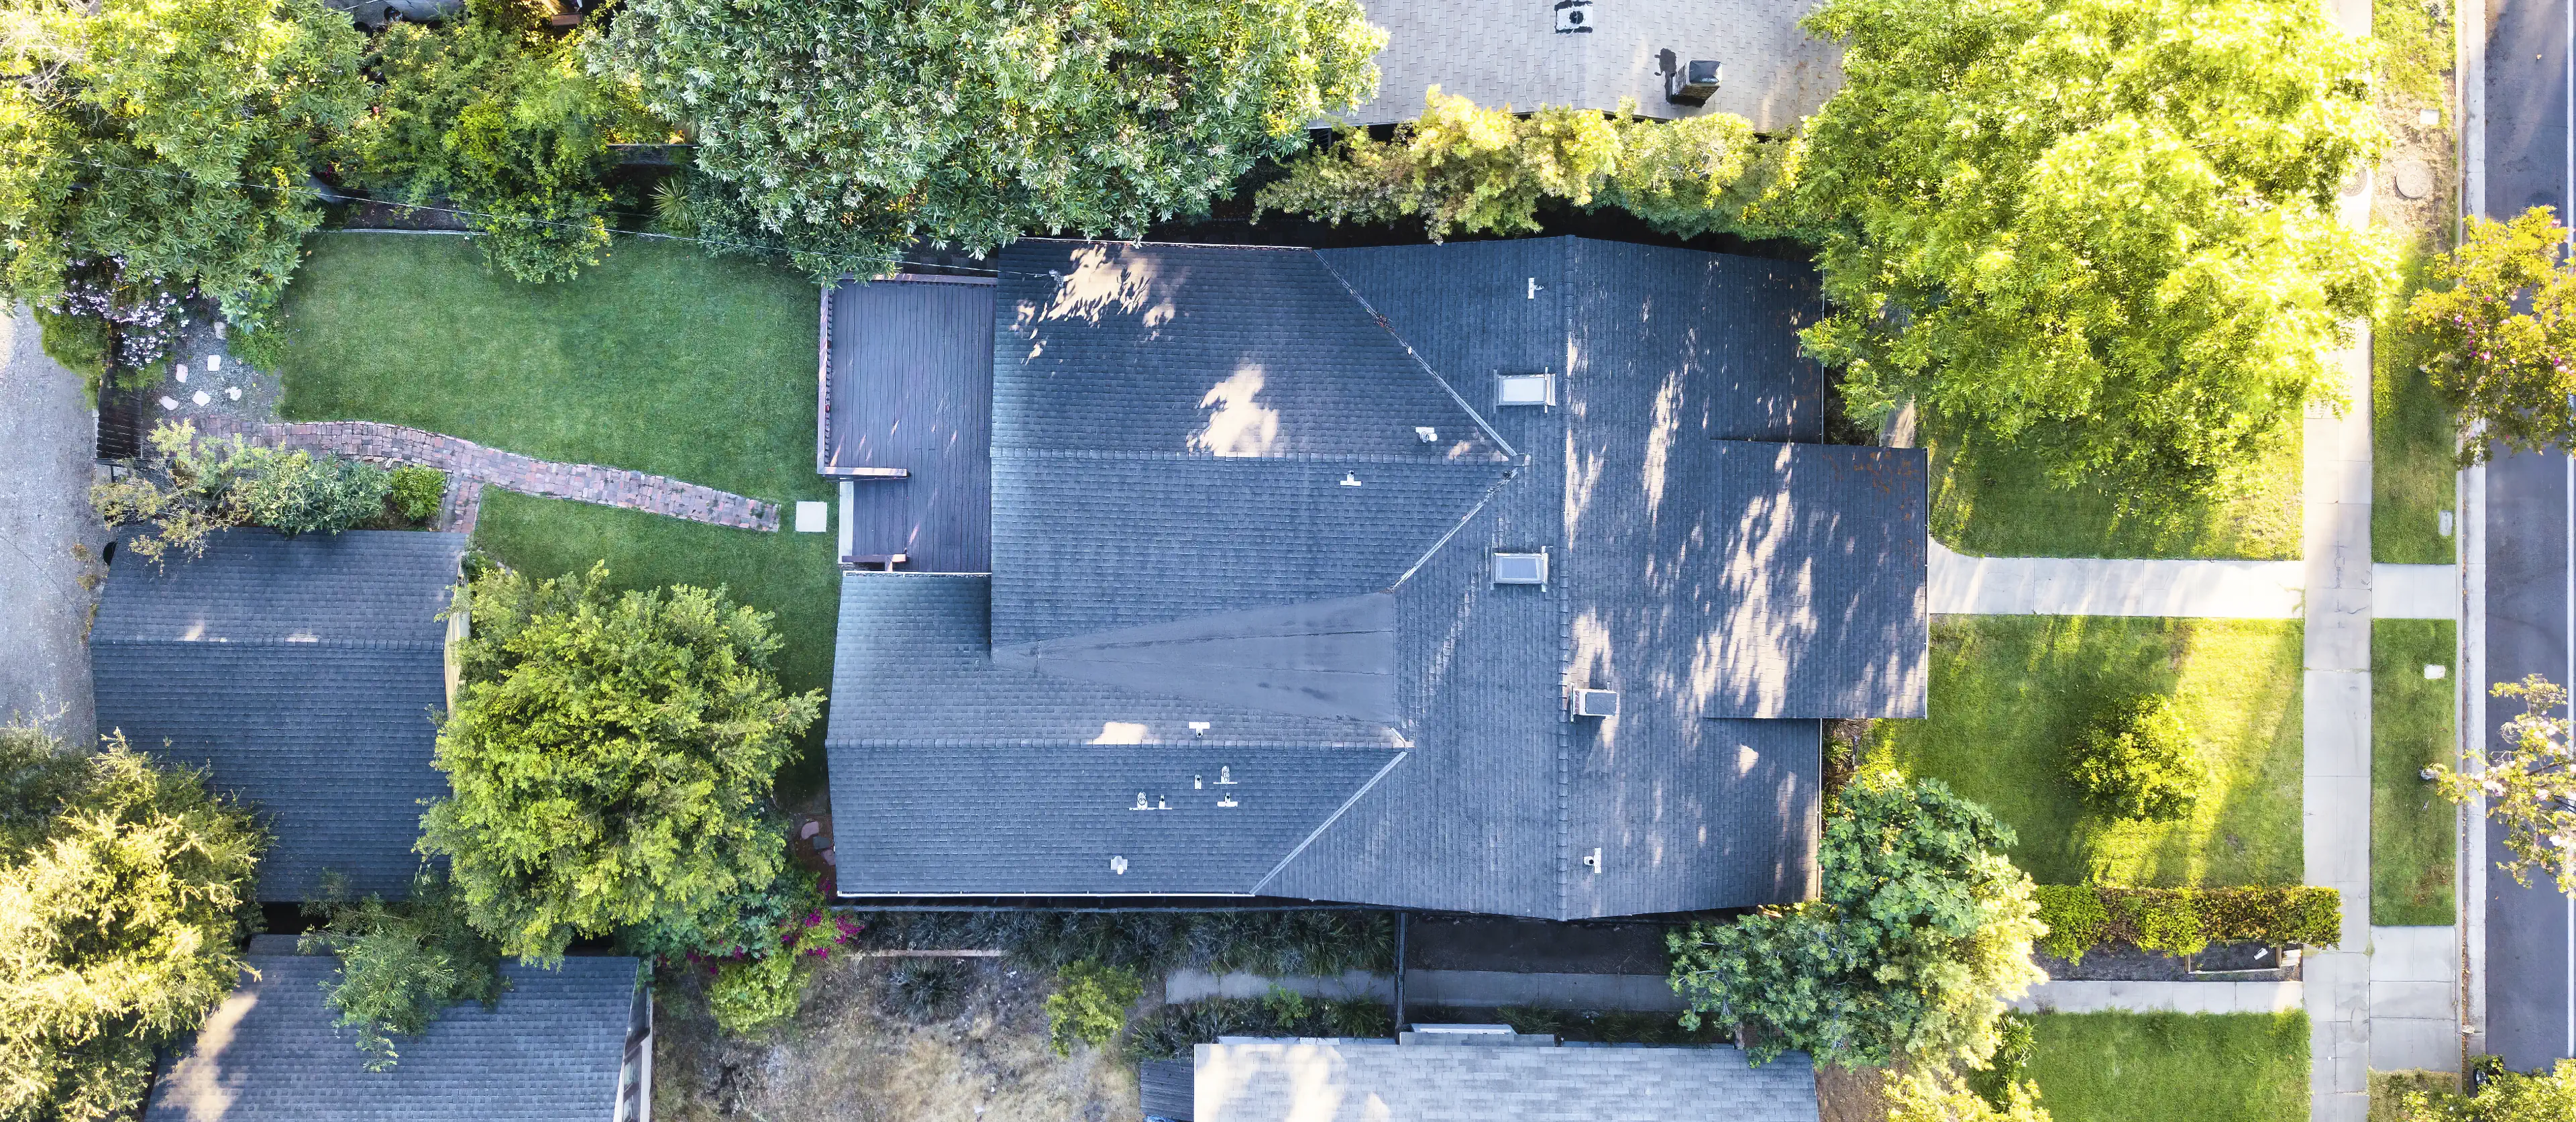 Stunning aerial view of a real estate listing at 1915 Mission St, South Pasadena 91030 captured by a drone, showcasing the property and its surroundings from a unique perspective.